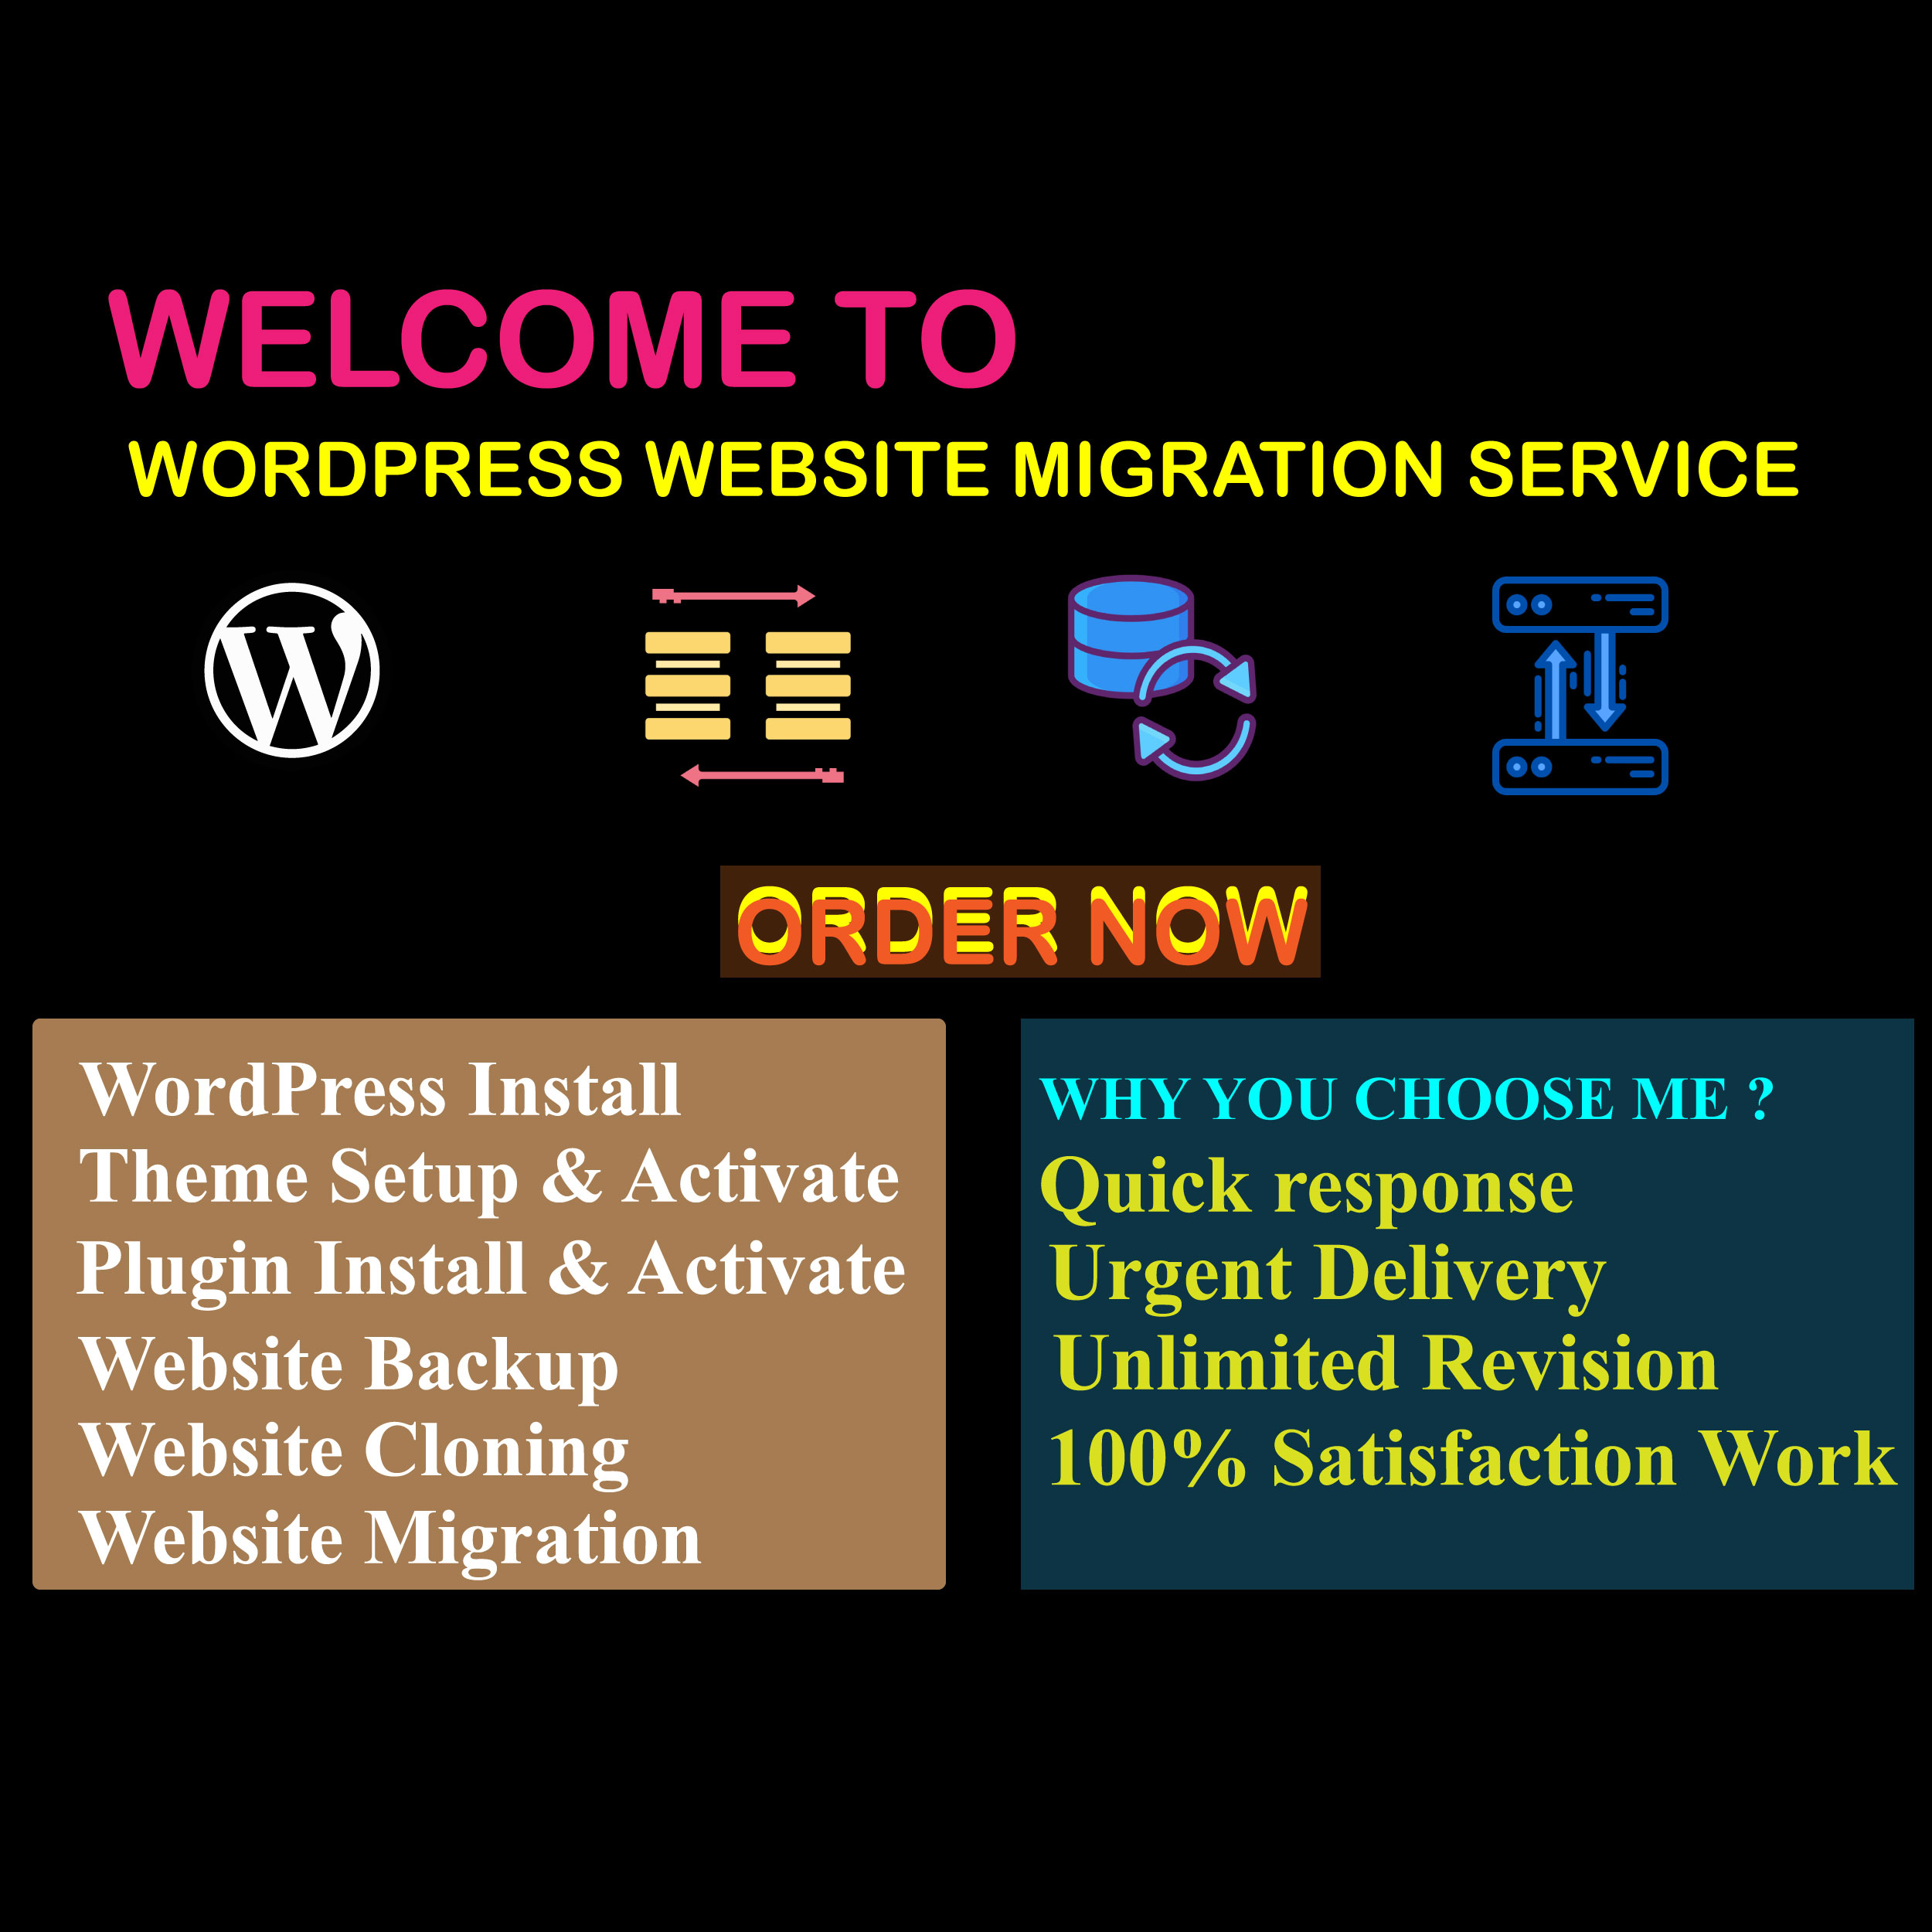 I will migrate website within 24 hours